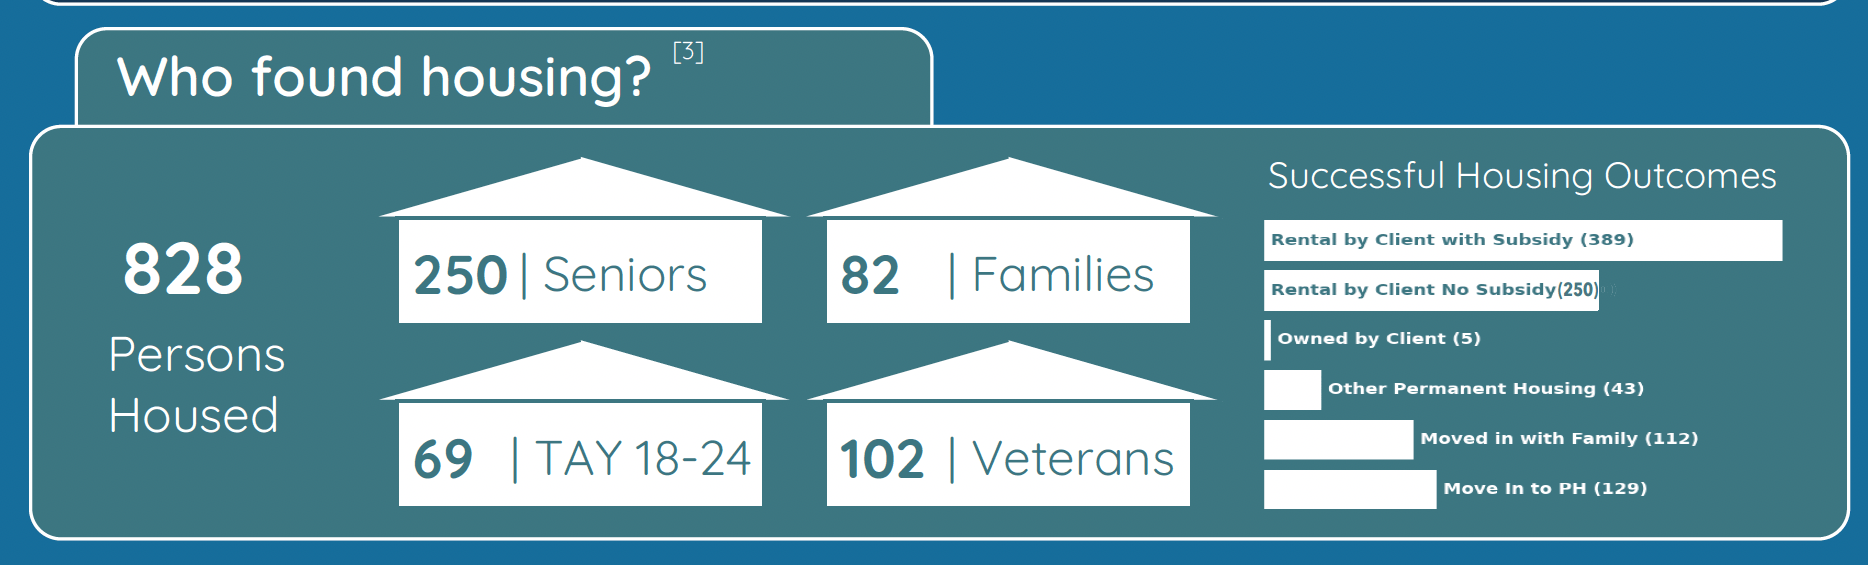 Screenshot from San Diego's monthly data report showing graphics of how many people were housed in the previous month, broken down by subpopulations and housing outcomes. 